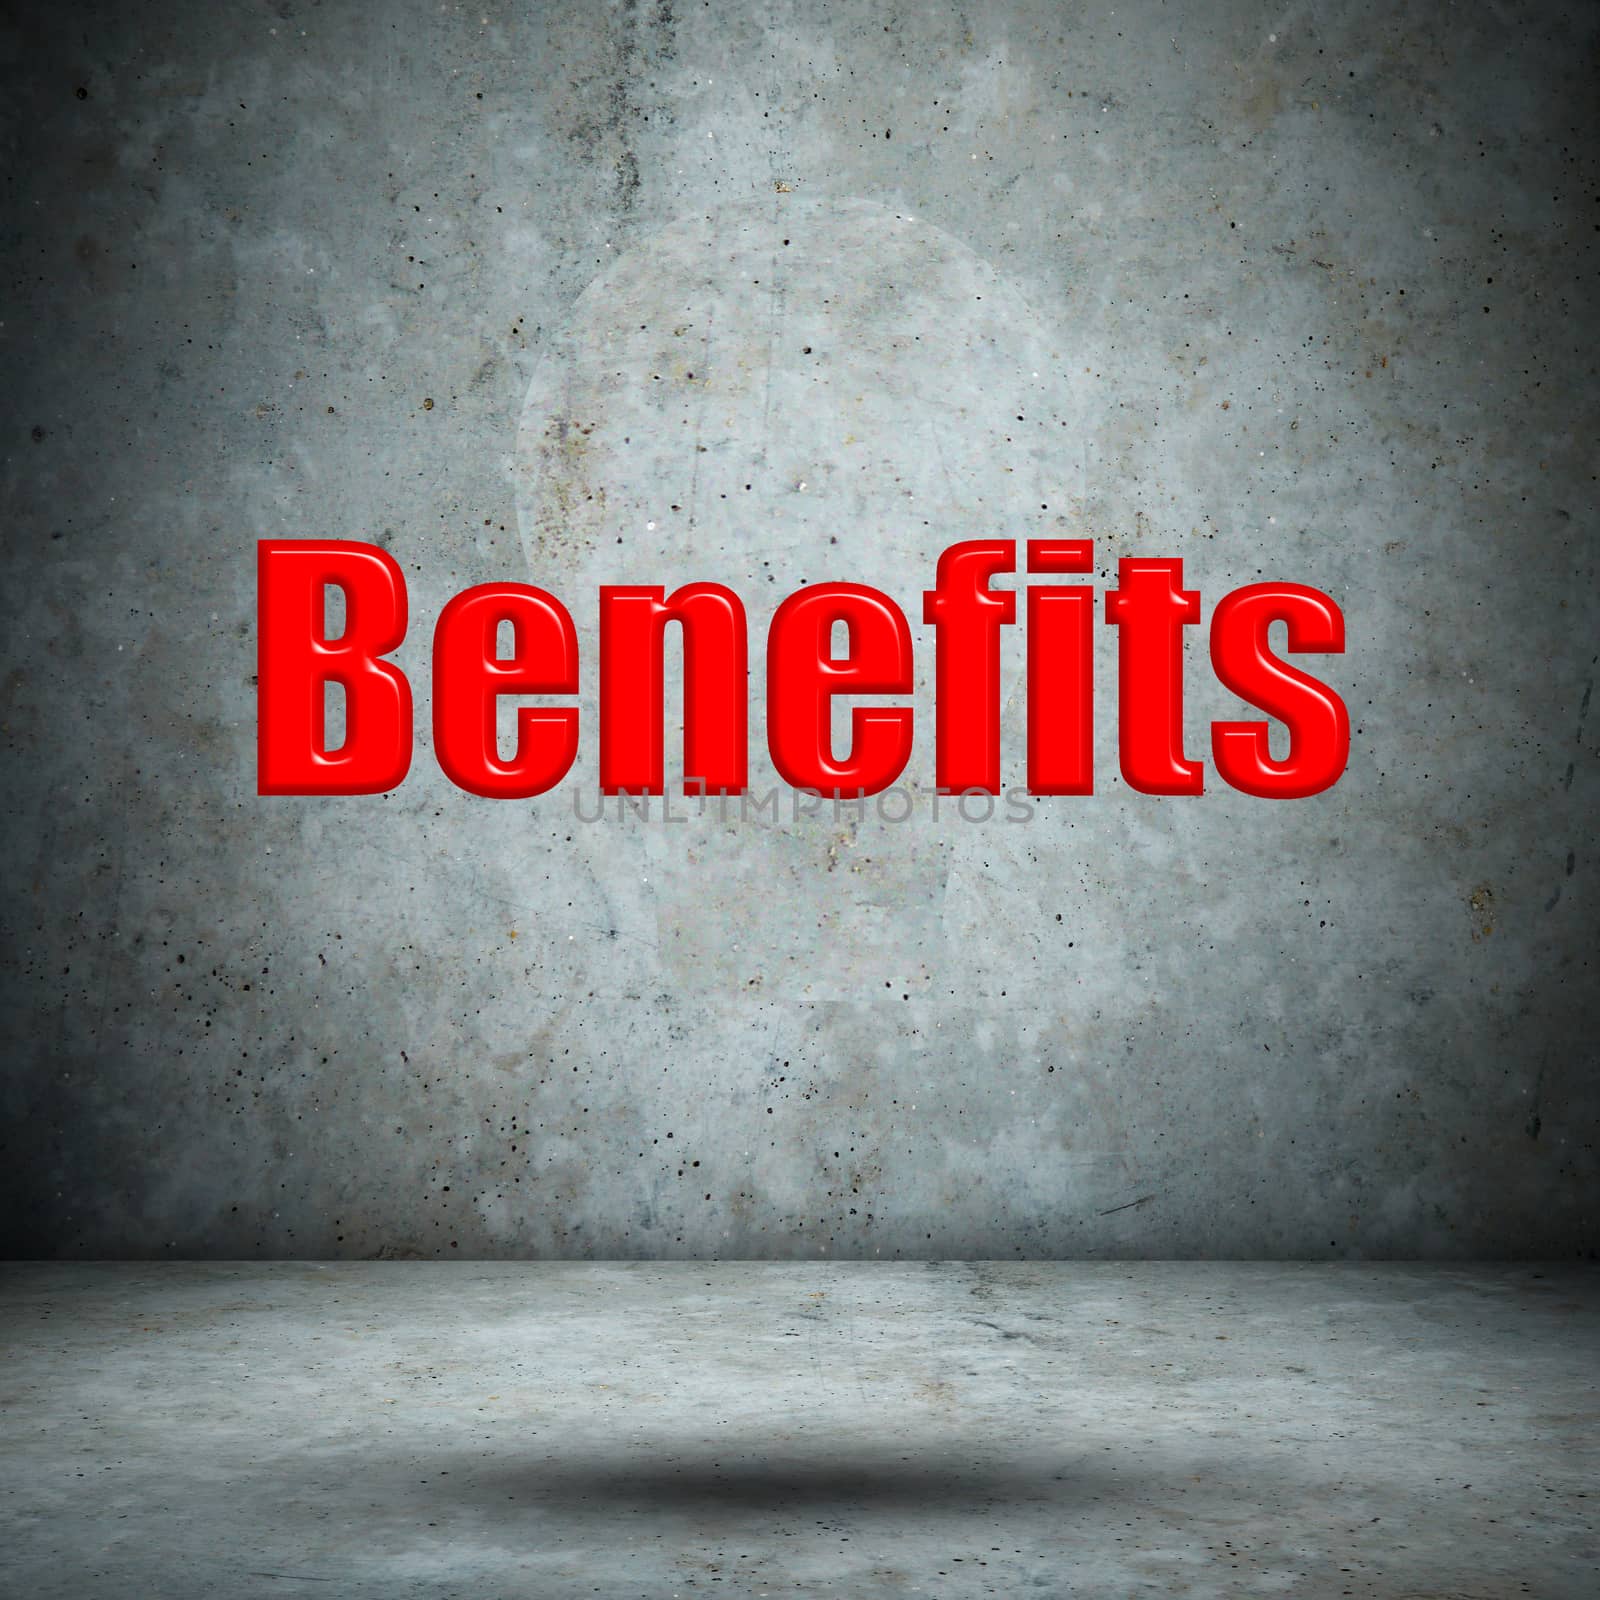 Benefits on concrete wall